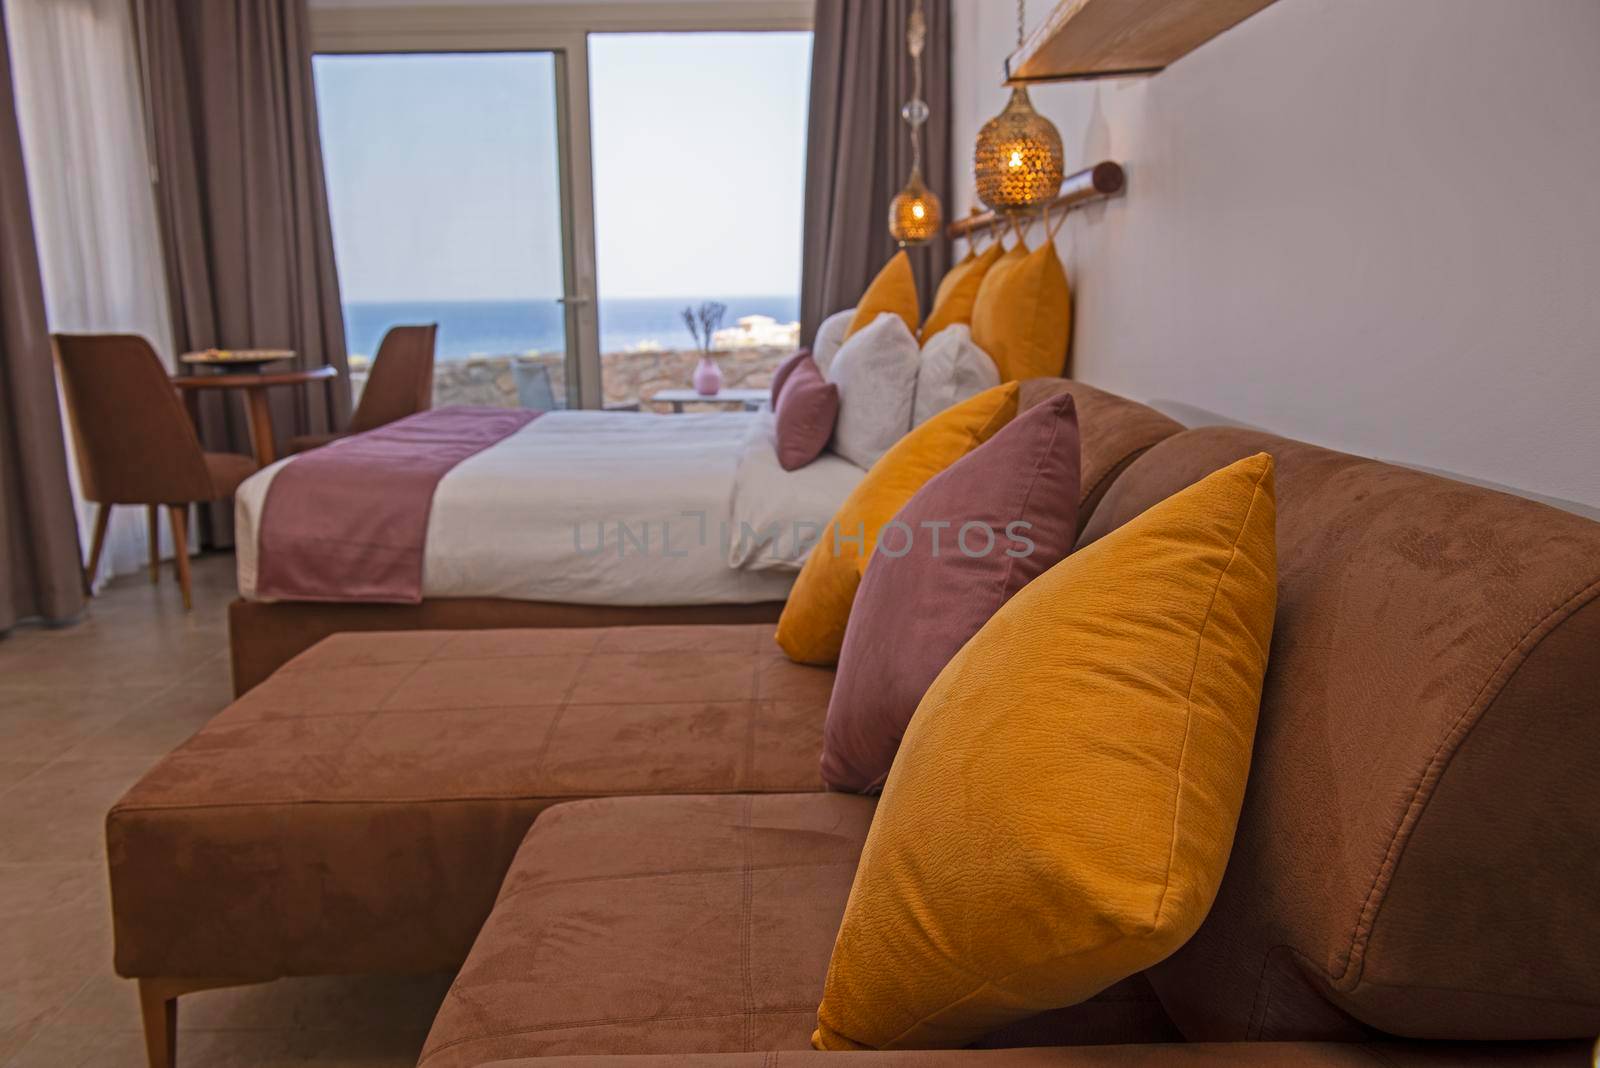 Living room lounge area in luxury studio apartment show home showing interior design decor furnishing with balcony sea view and double bed